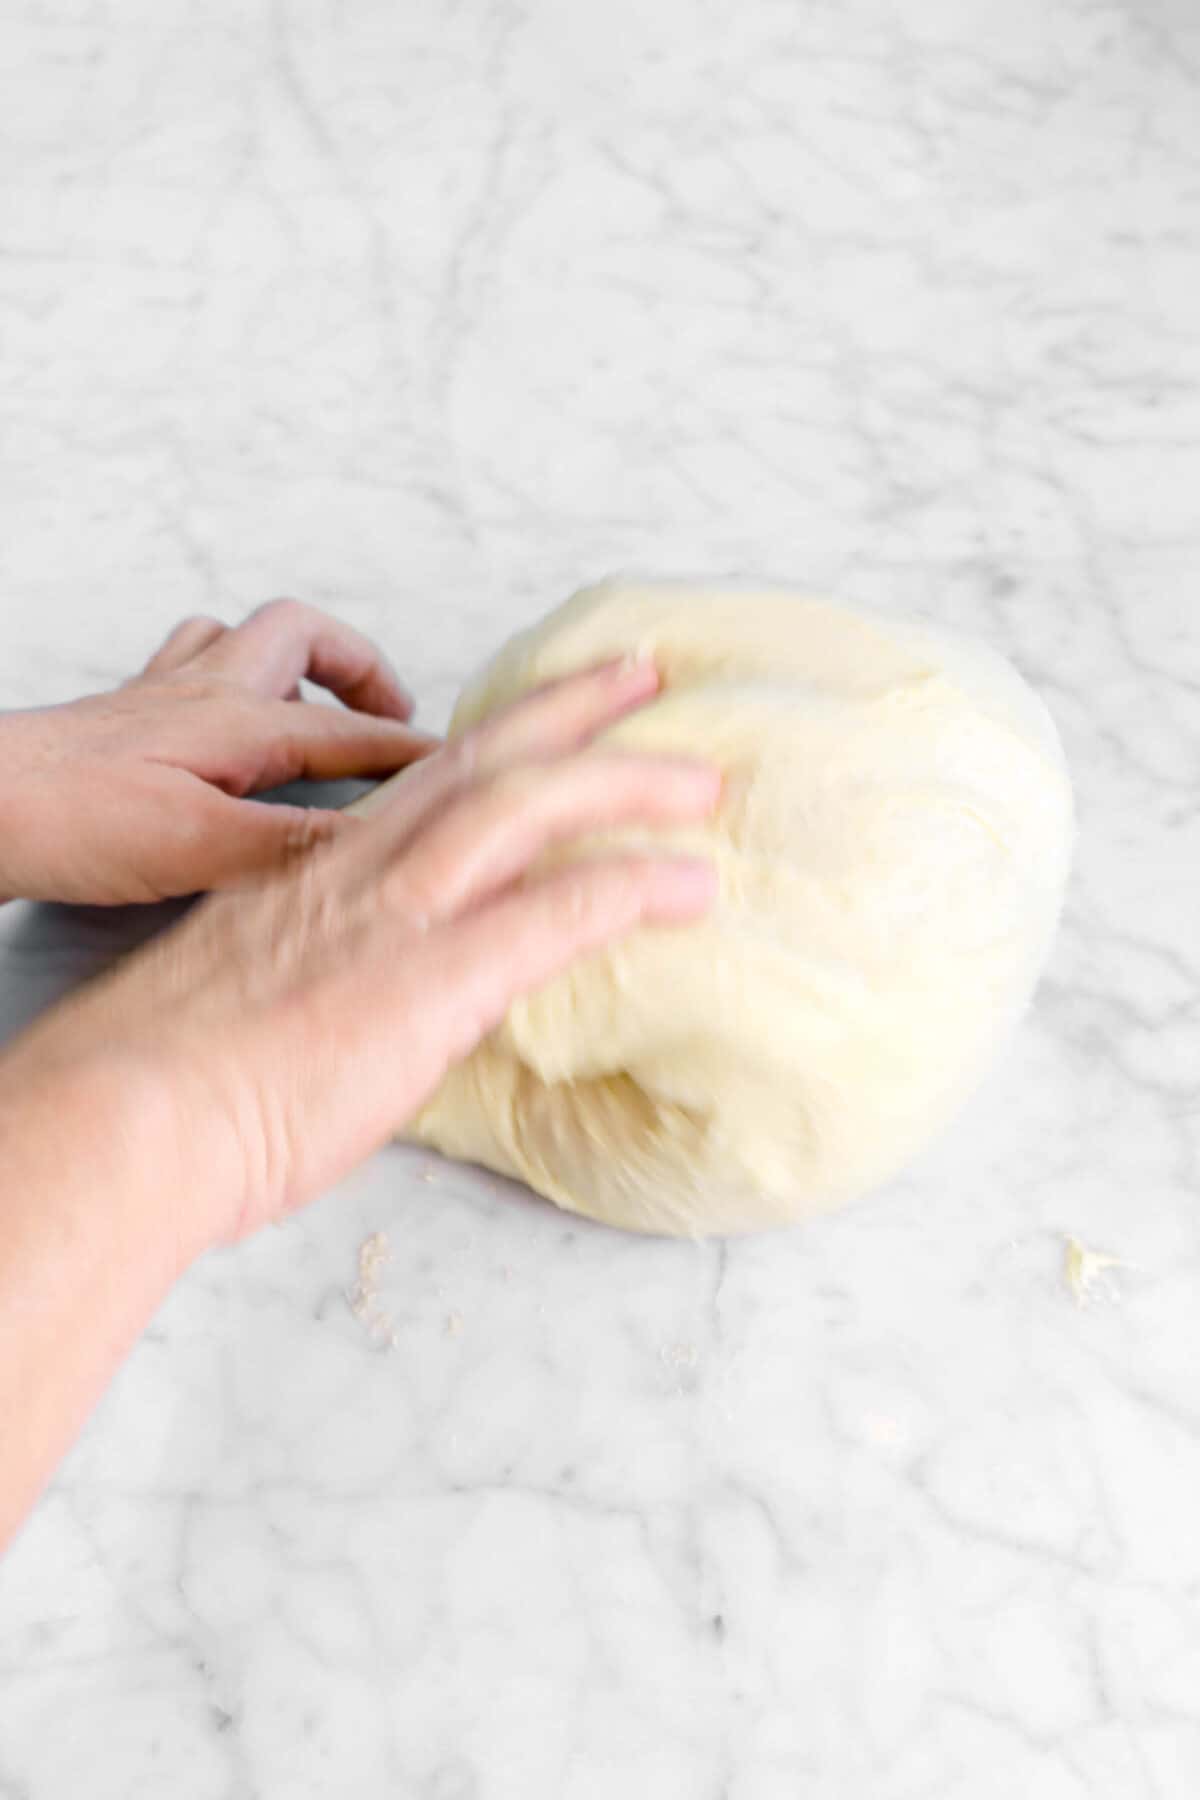 dough being folded to the left